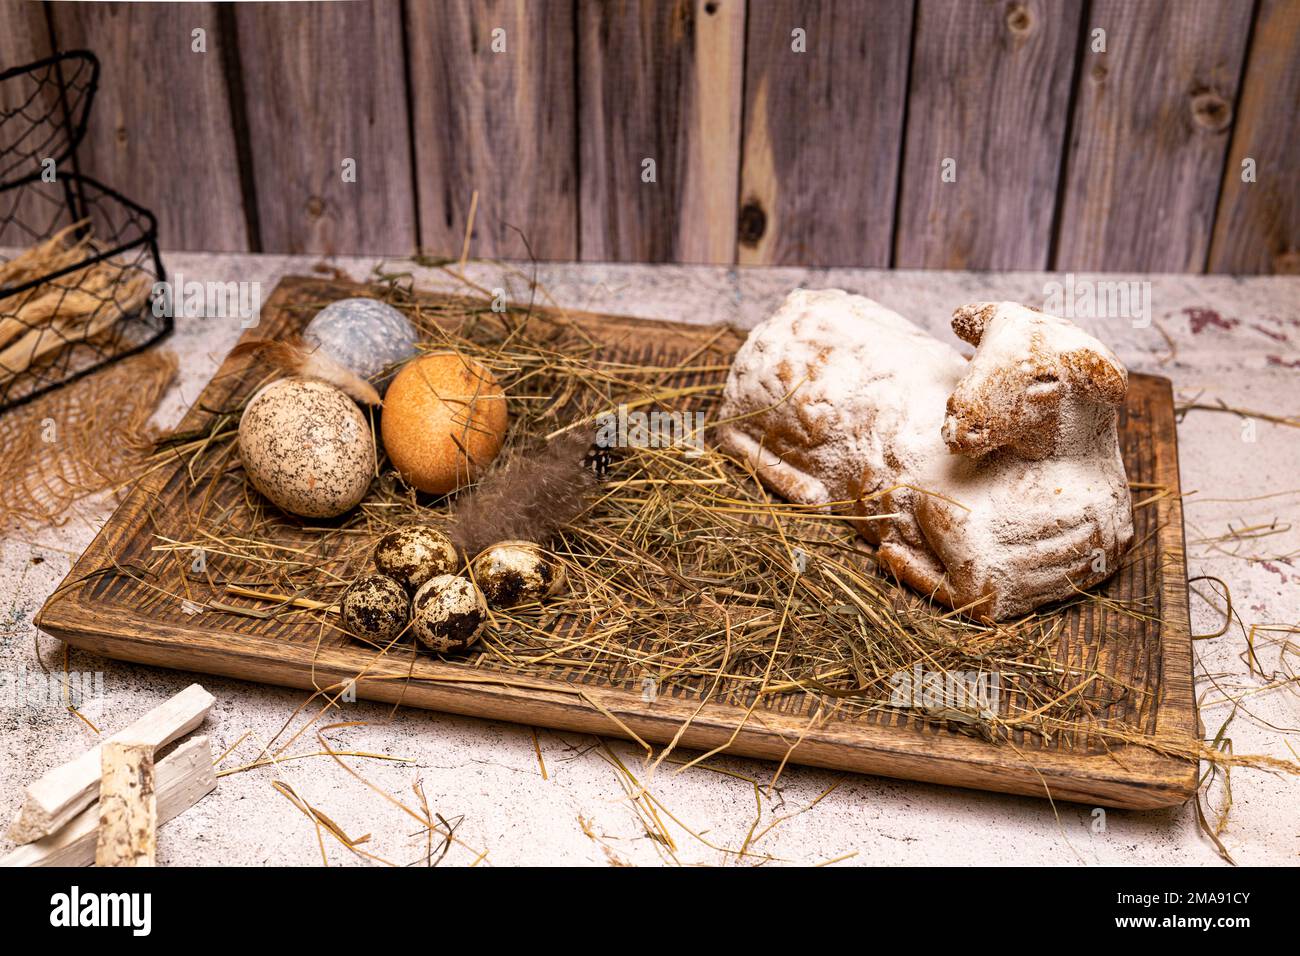 Easter lamb made of cake with colorful Easter eggs on straw, still life Stock Photo